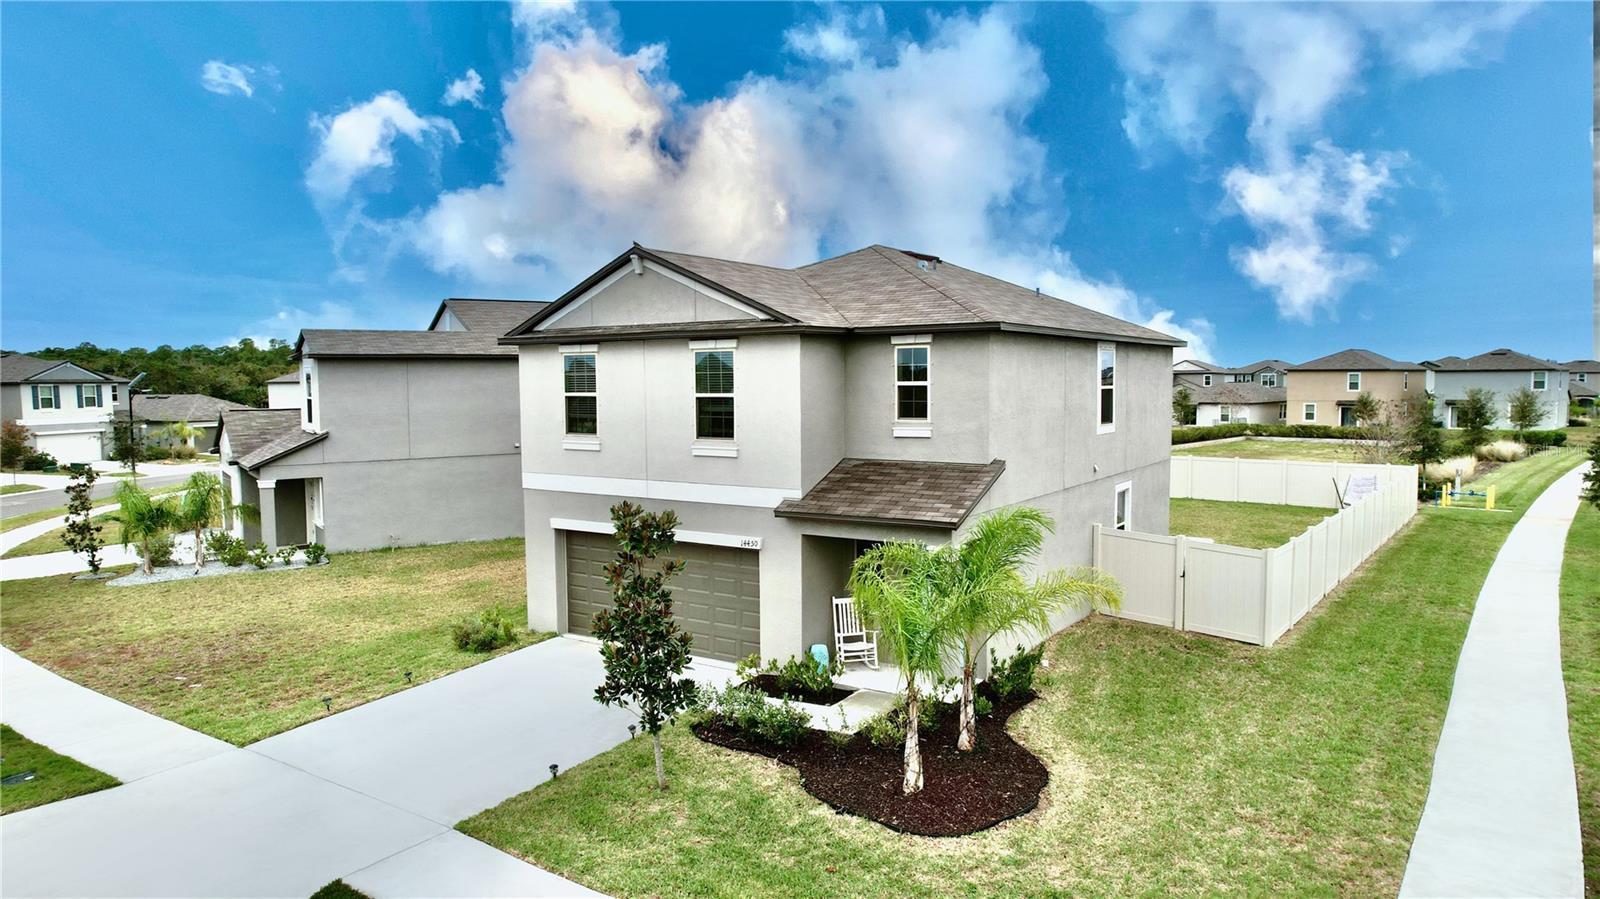 Photo one of 14450 Touch Gold Ln Ruskin FL 33573 | MLS T3496445